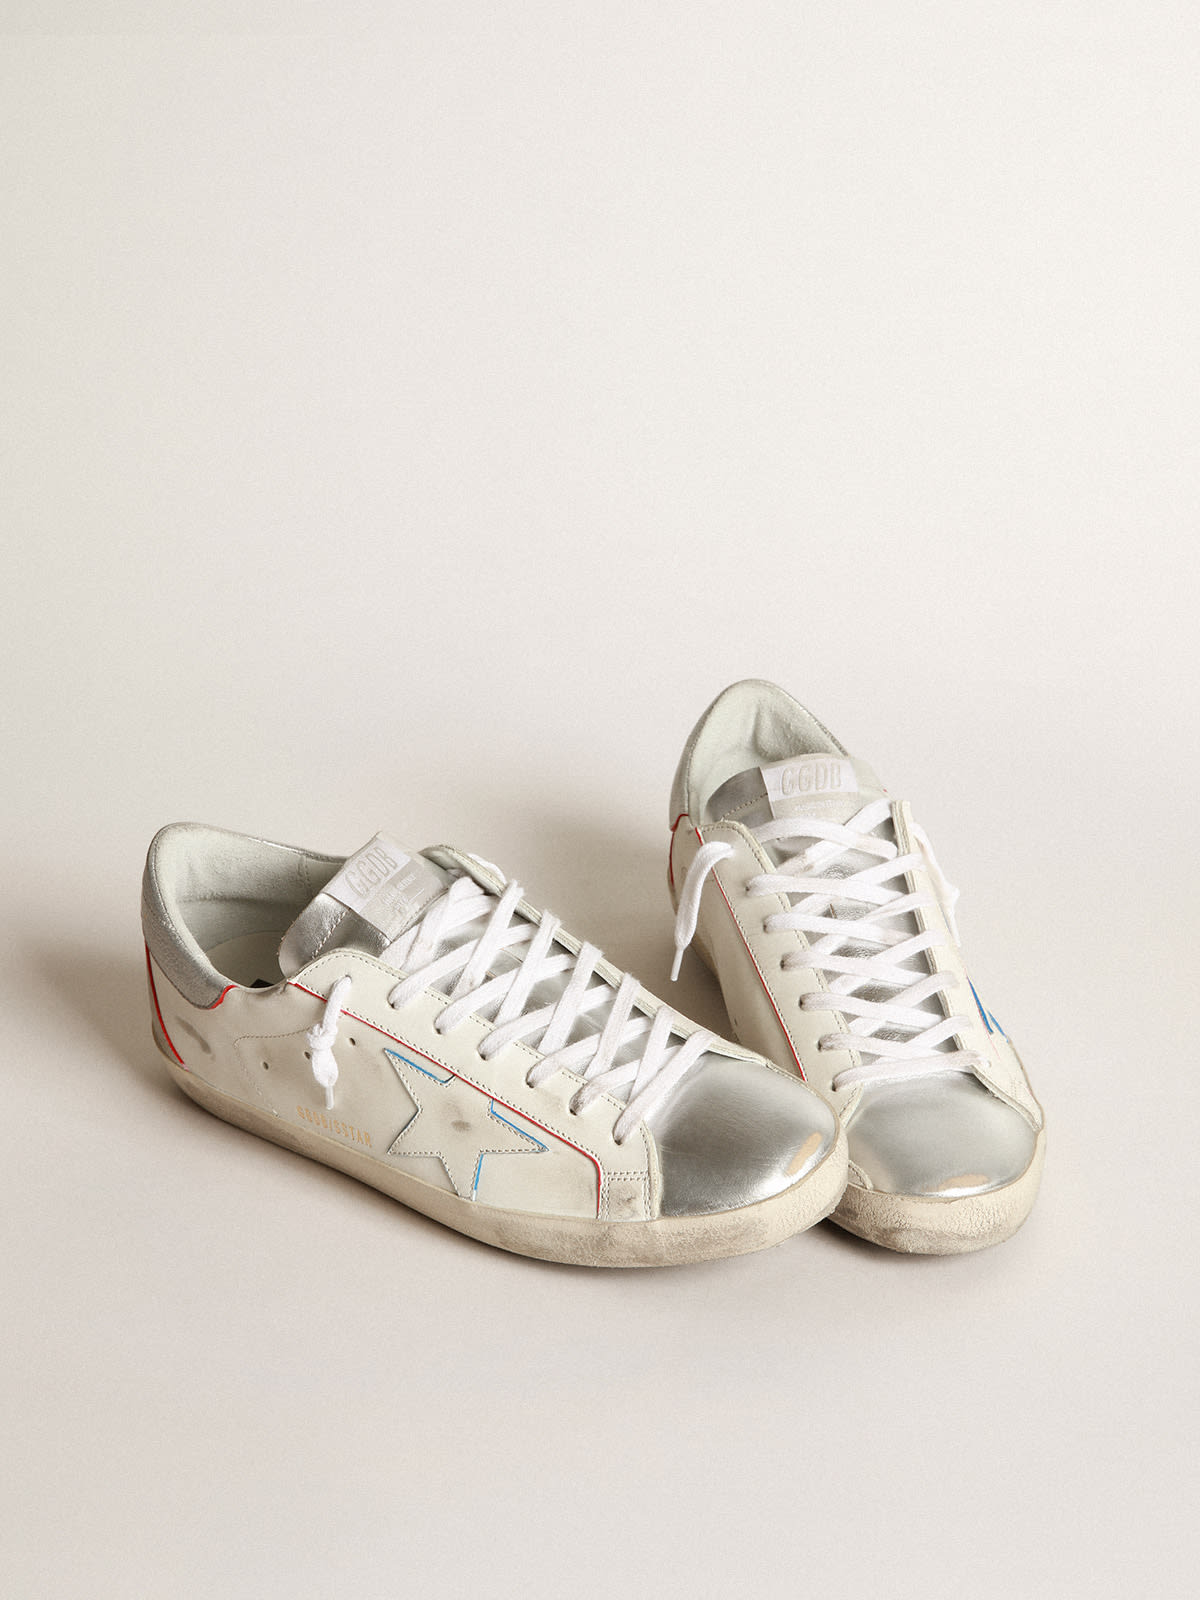 Golden Goose - Super-Star sneakers with silver laminated leather inserts and red and blue edging in 